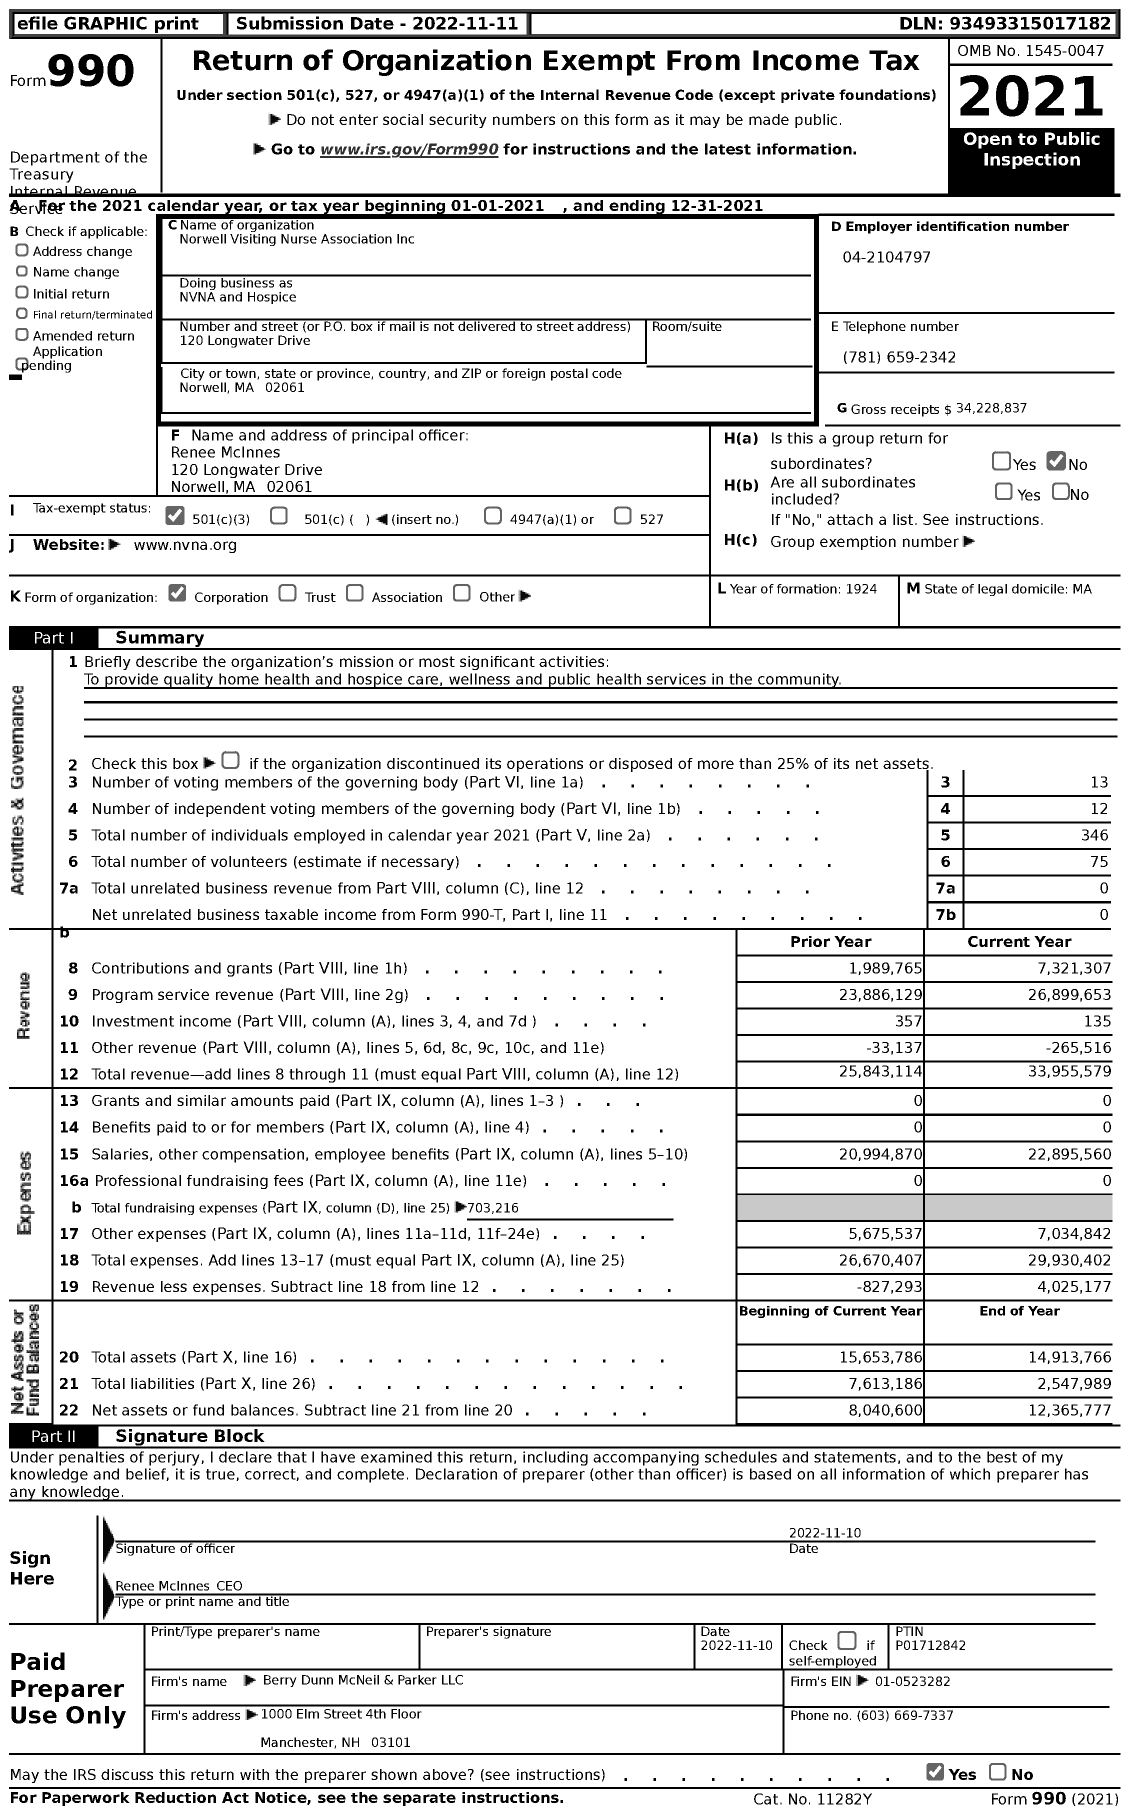 Image of first page of 2021 Form 990 for NVNA and Hospice (NVNA)